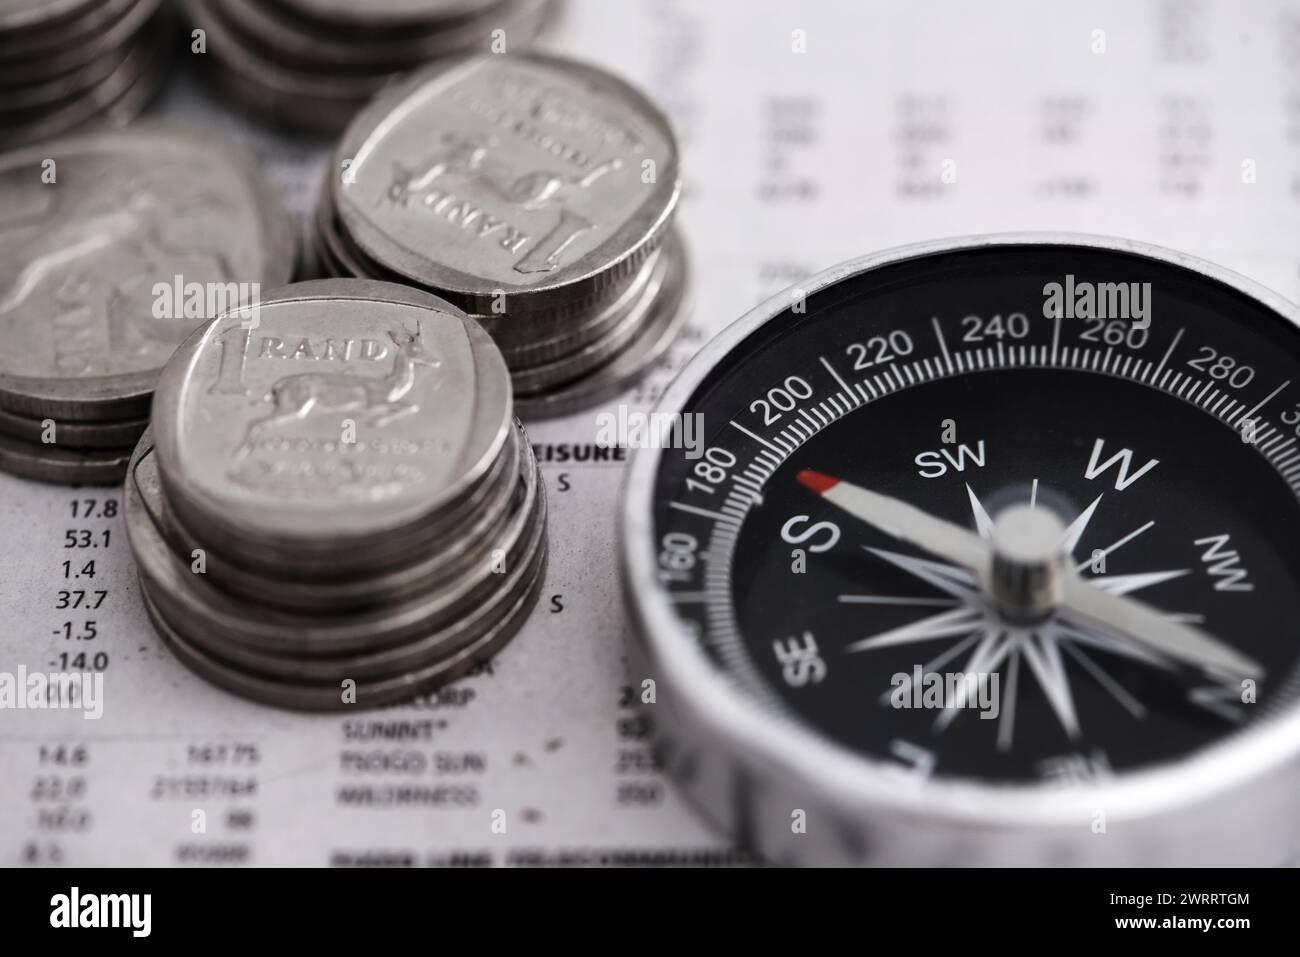 Coins, compass and business section of newspaper for exchange rate and direction on stock market for investor. Information, money and illustration of Stock Photo